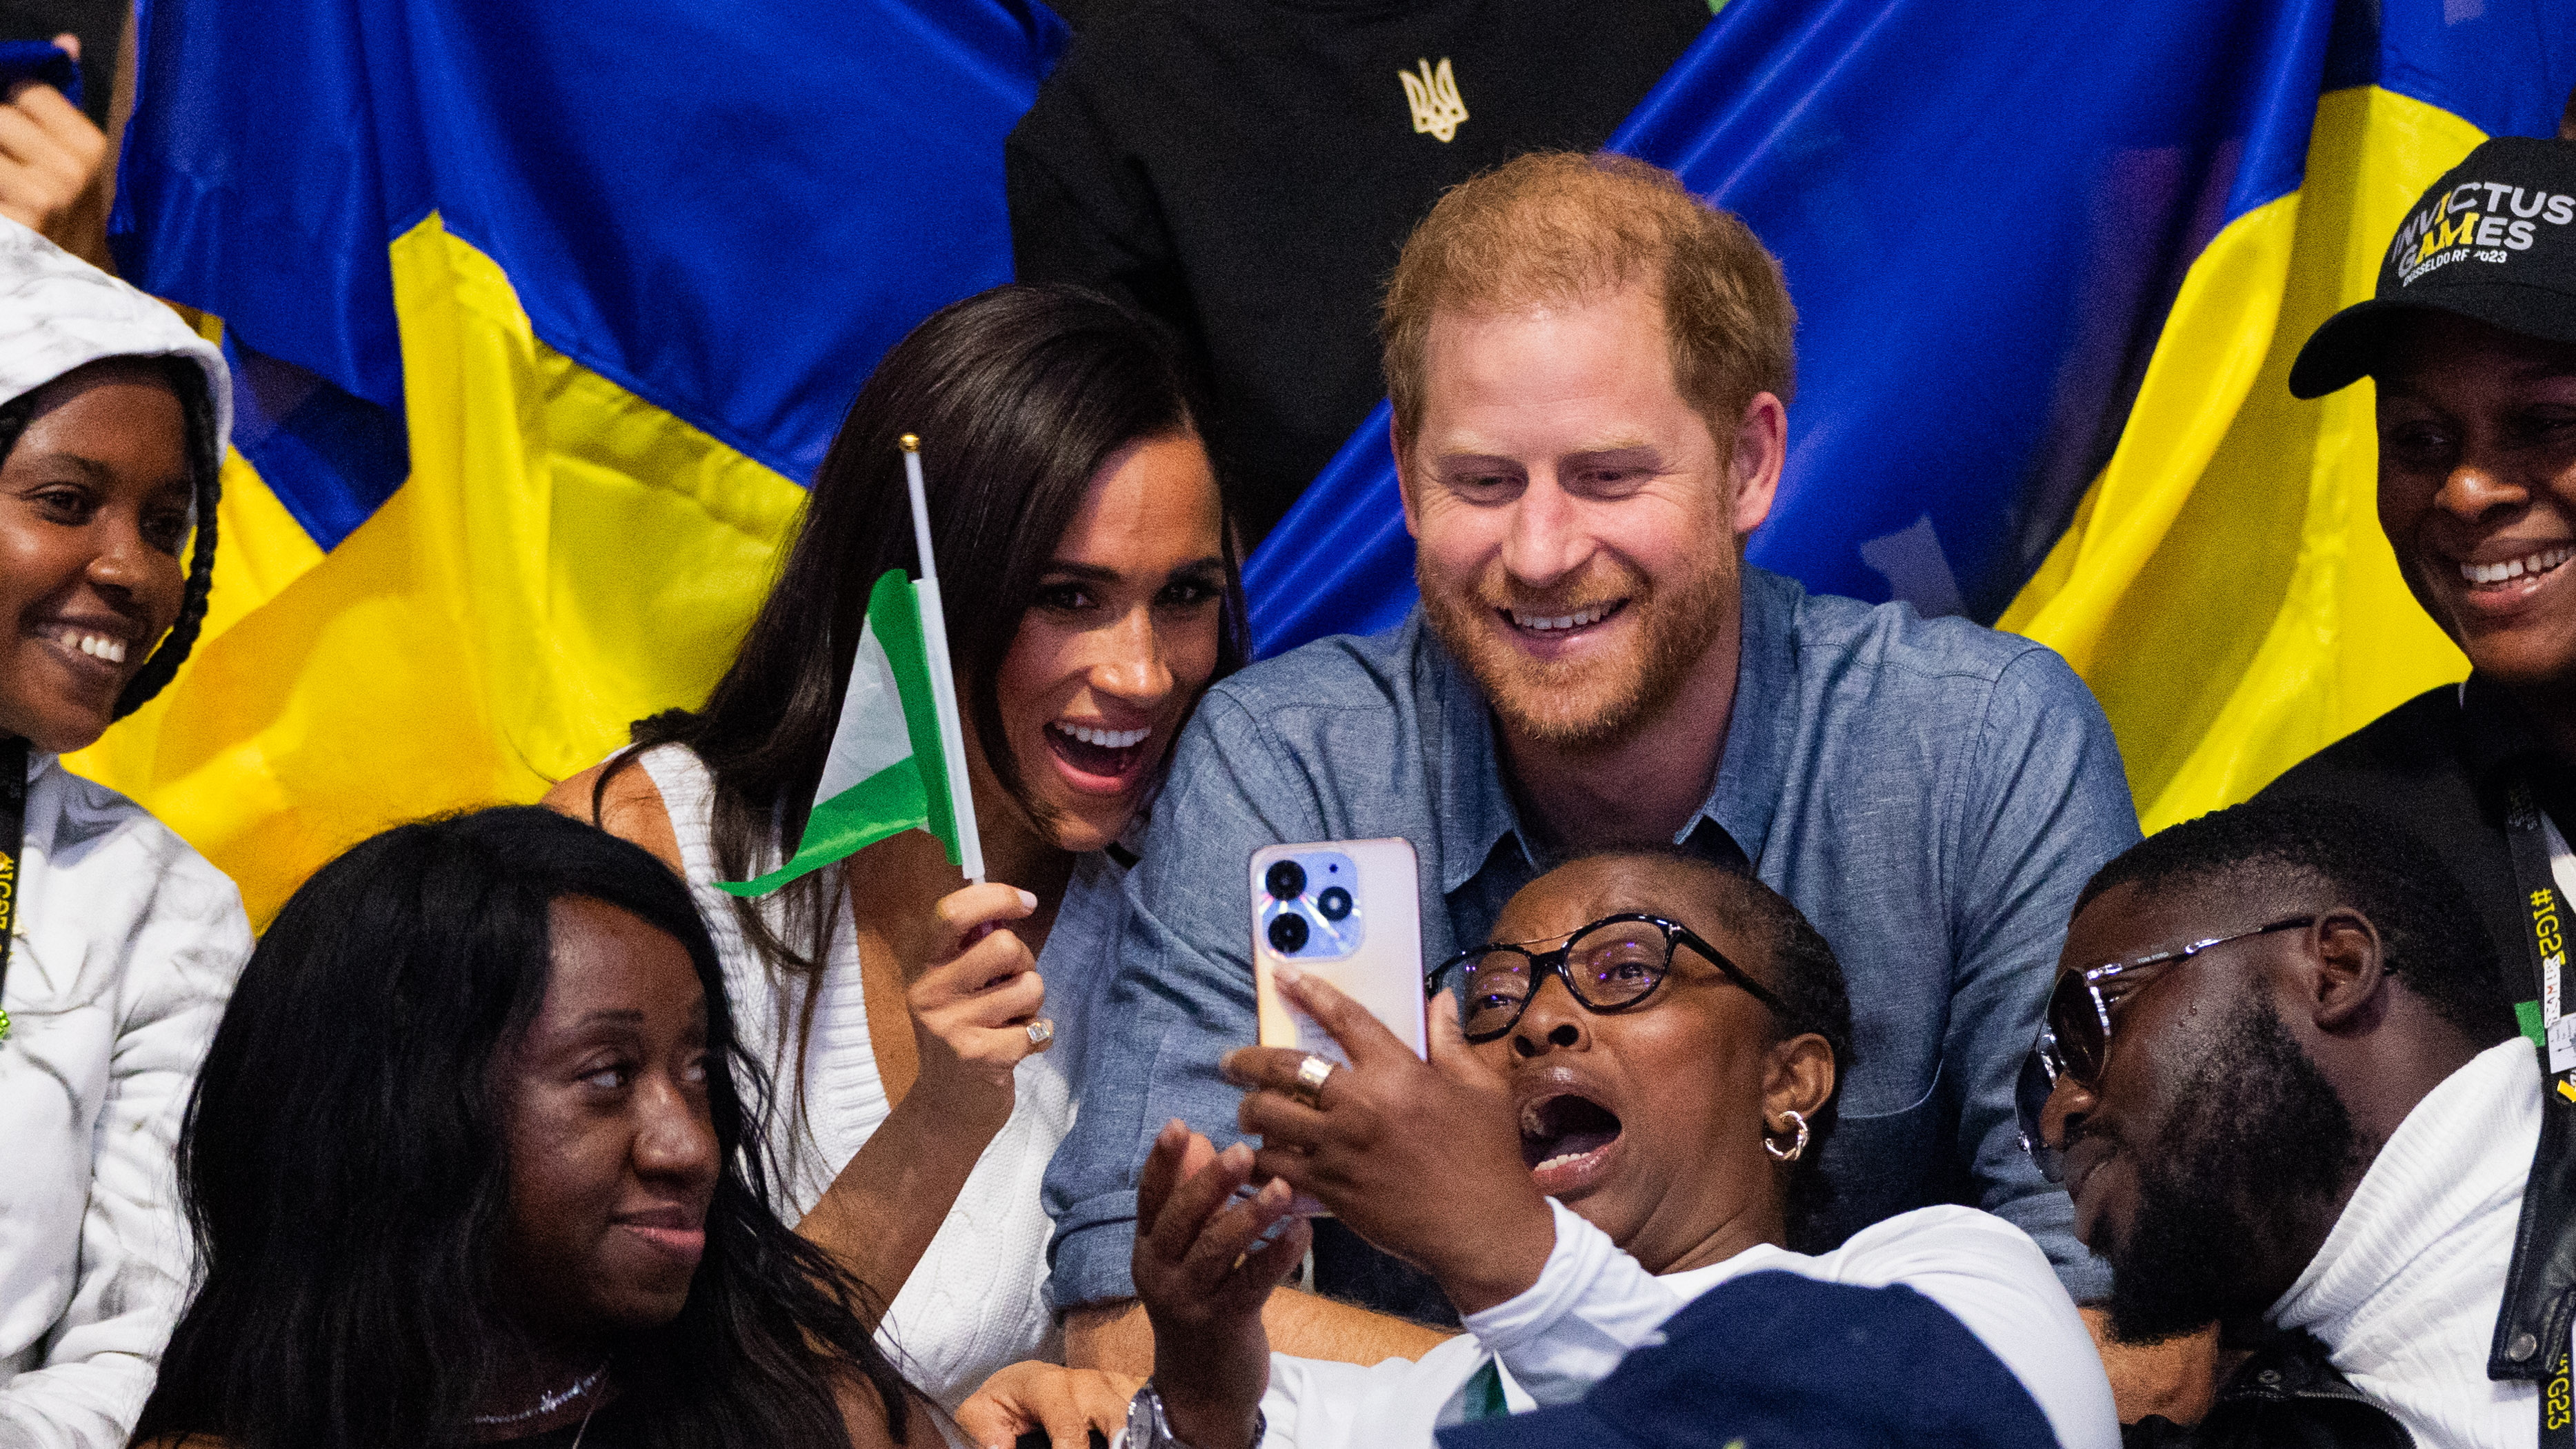 Meghan Markle waving the Nigerian flag, with Prince Harry by her side, as they interact with Nigerian fans during the 6th Invictus Games in North Rhine-Westphalia, Duesseldorf on September 14, 2023 | Source: Getty Images